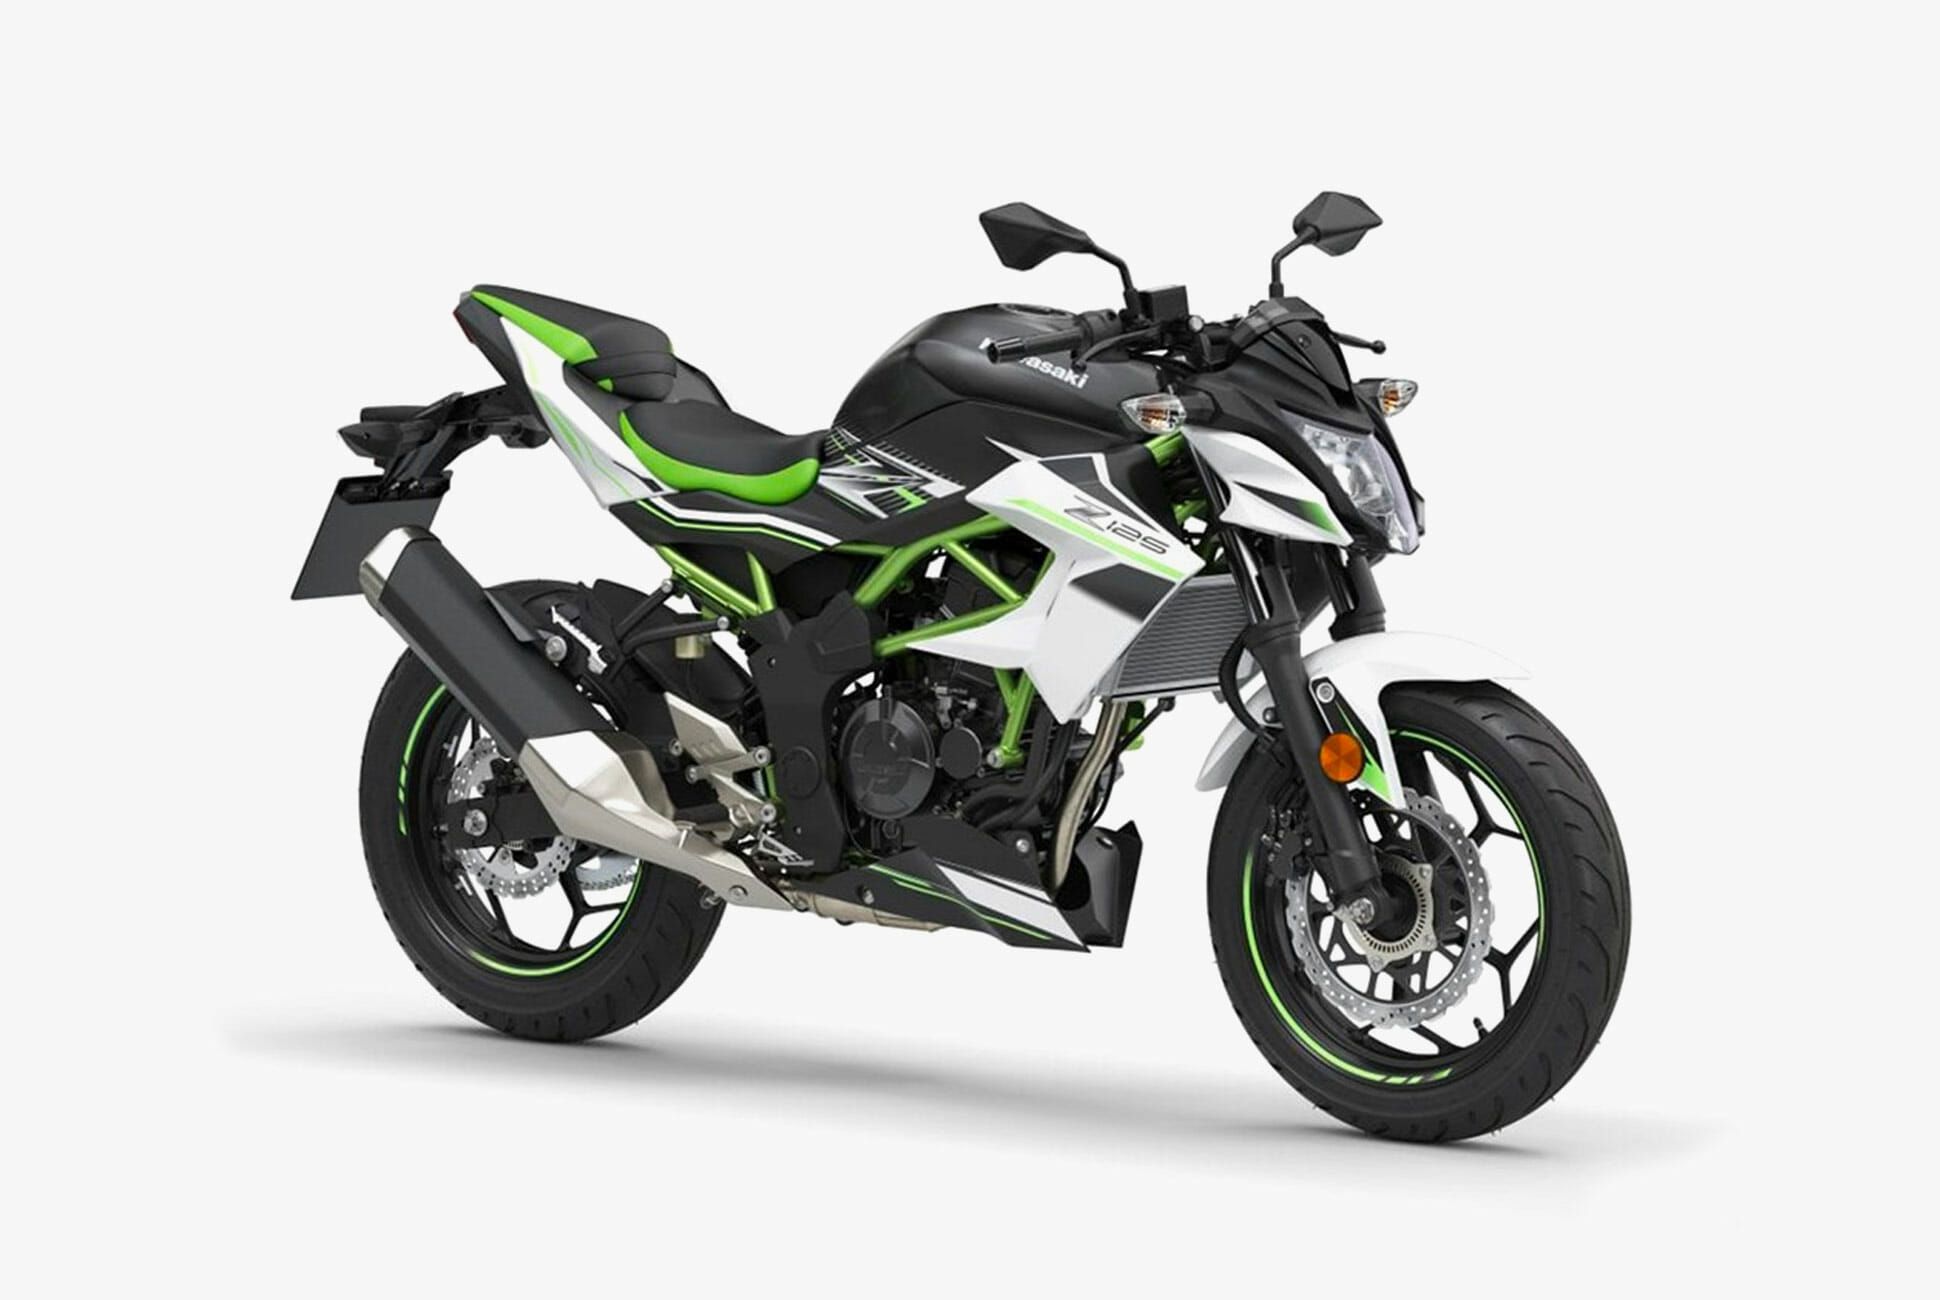 tornillo solo elefante We Need the New Small Sport Bikes From Kawasaki, Here in the US